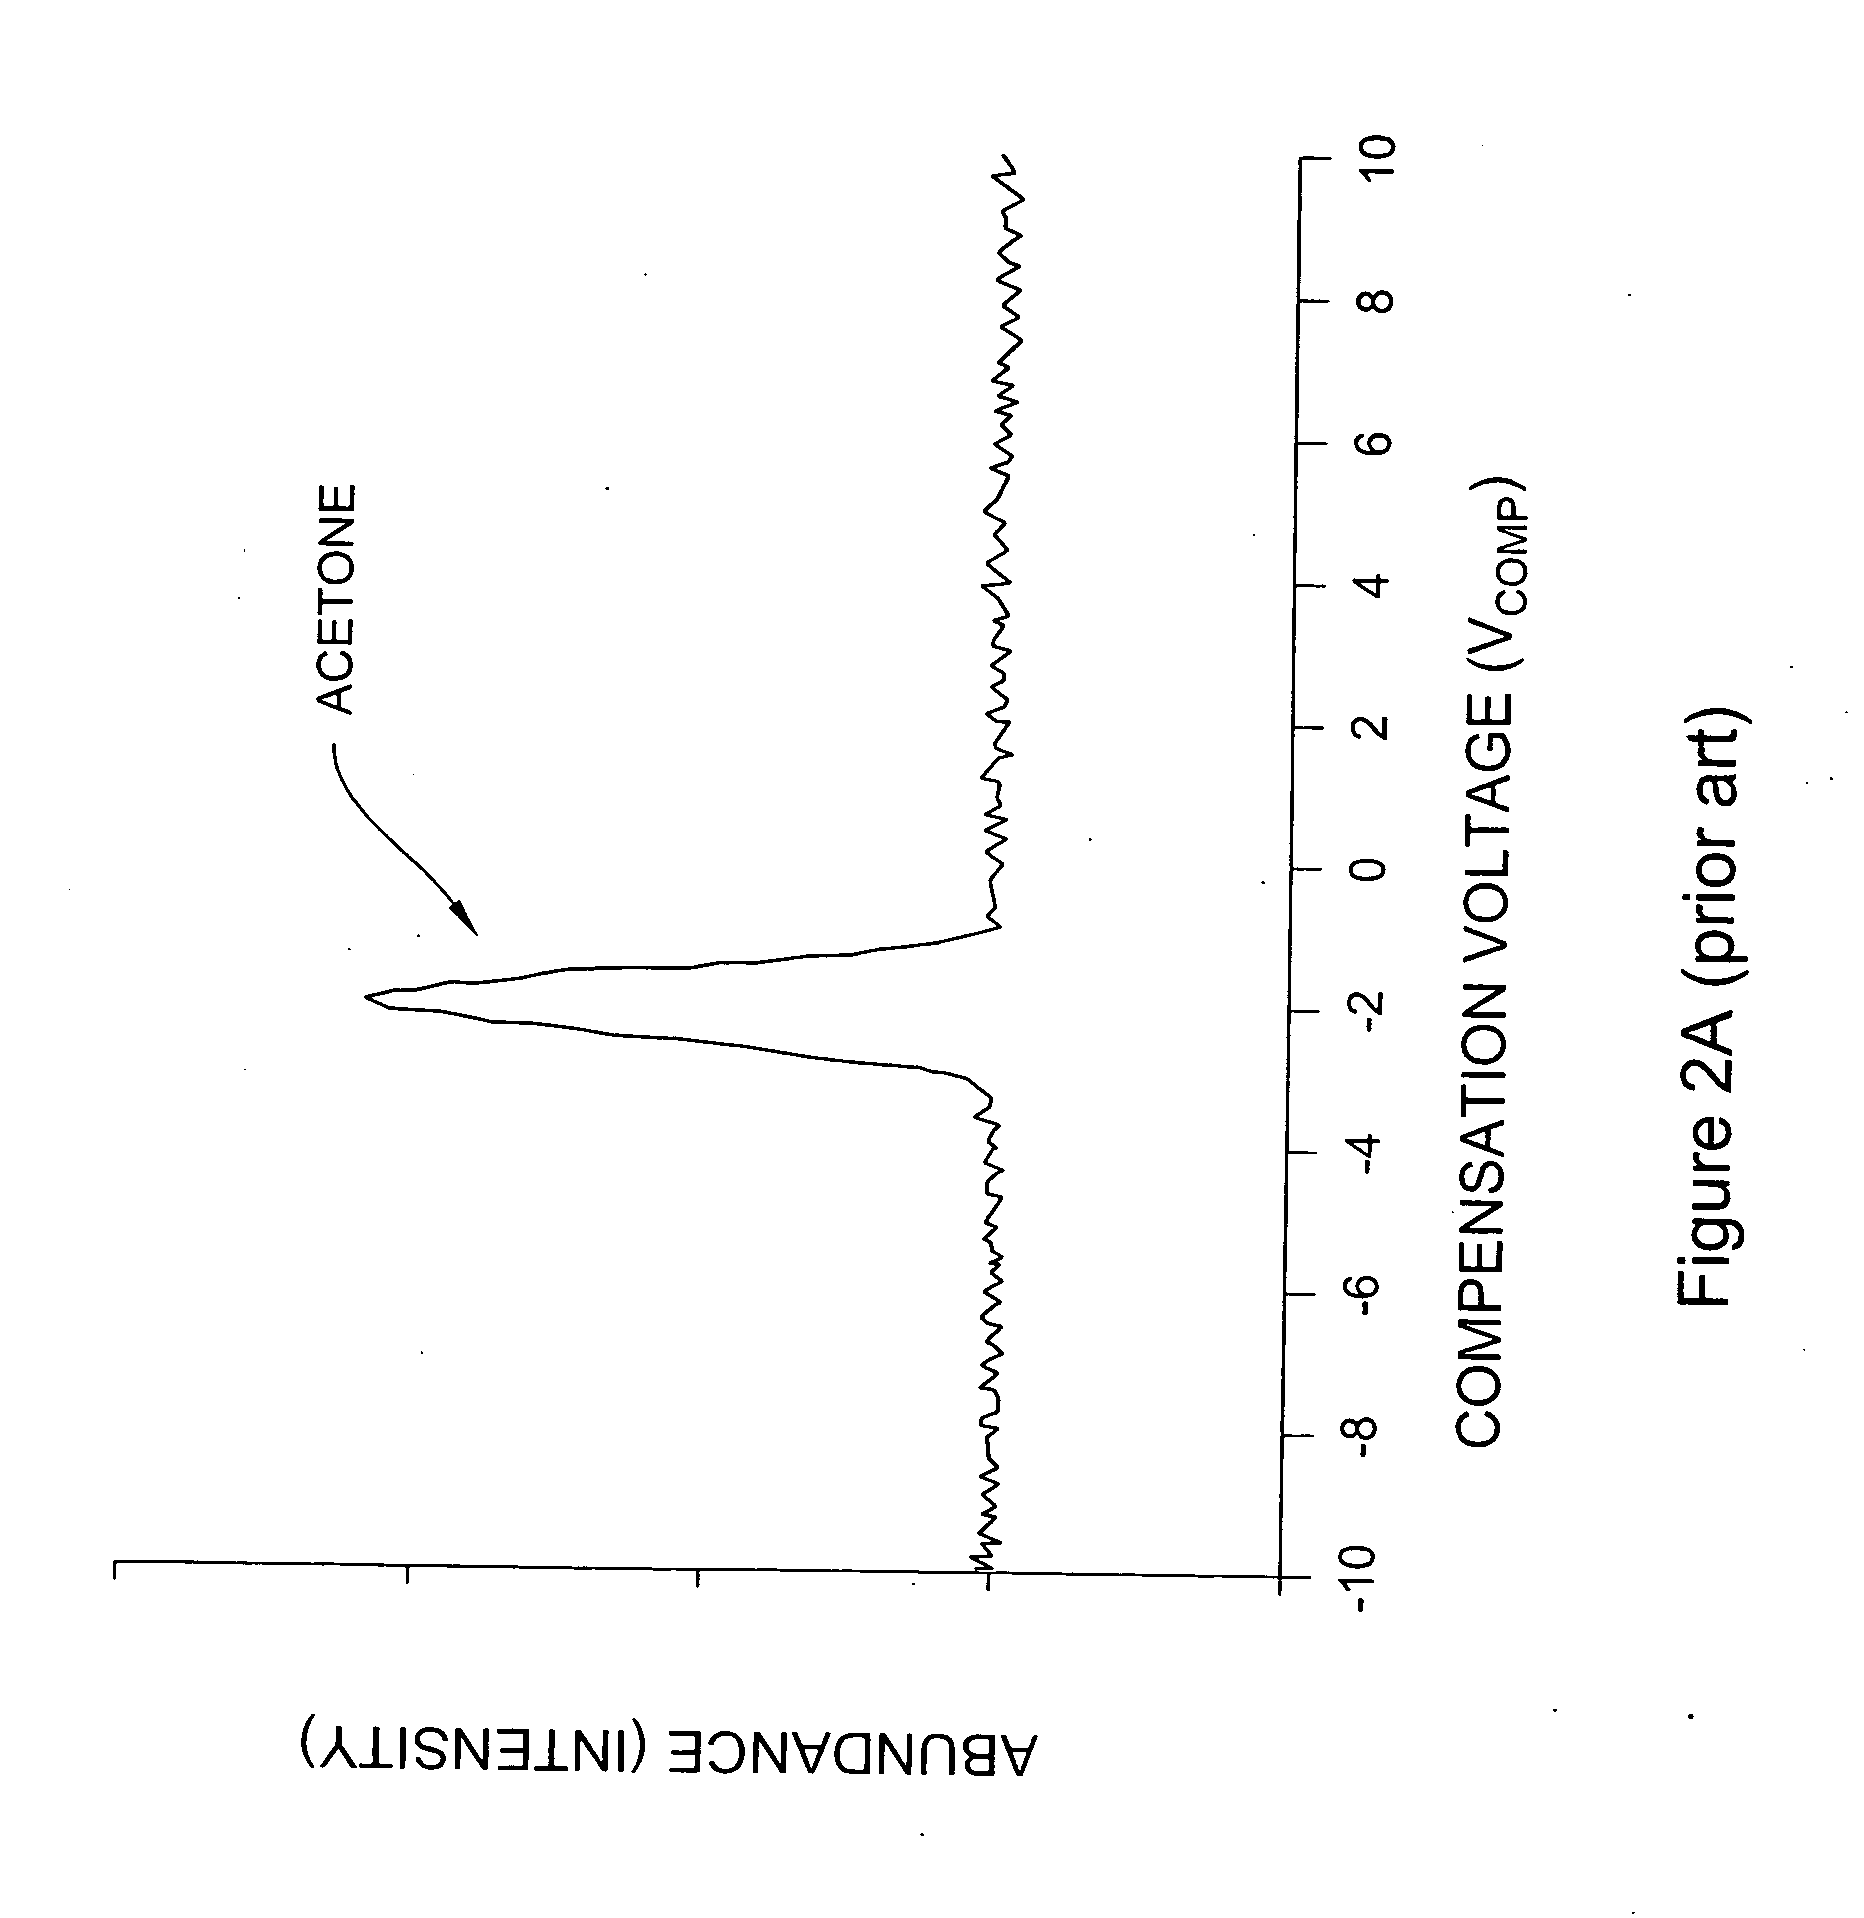 Method and apparatus for enhanced ion mobility based sample analysis using various analyzer configurations